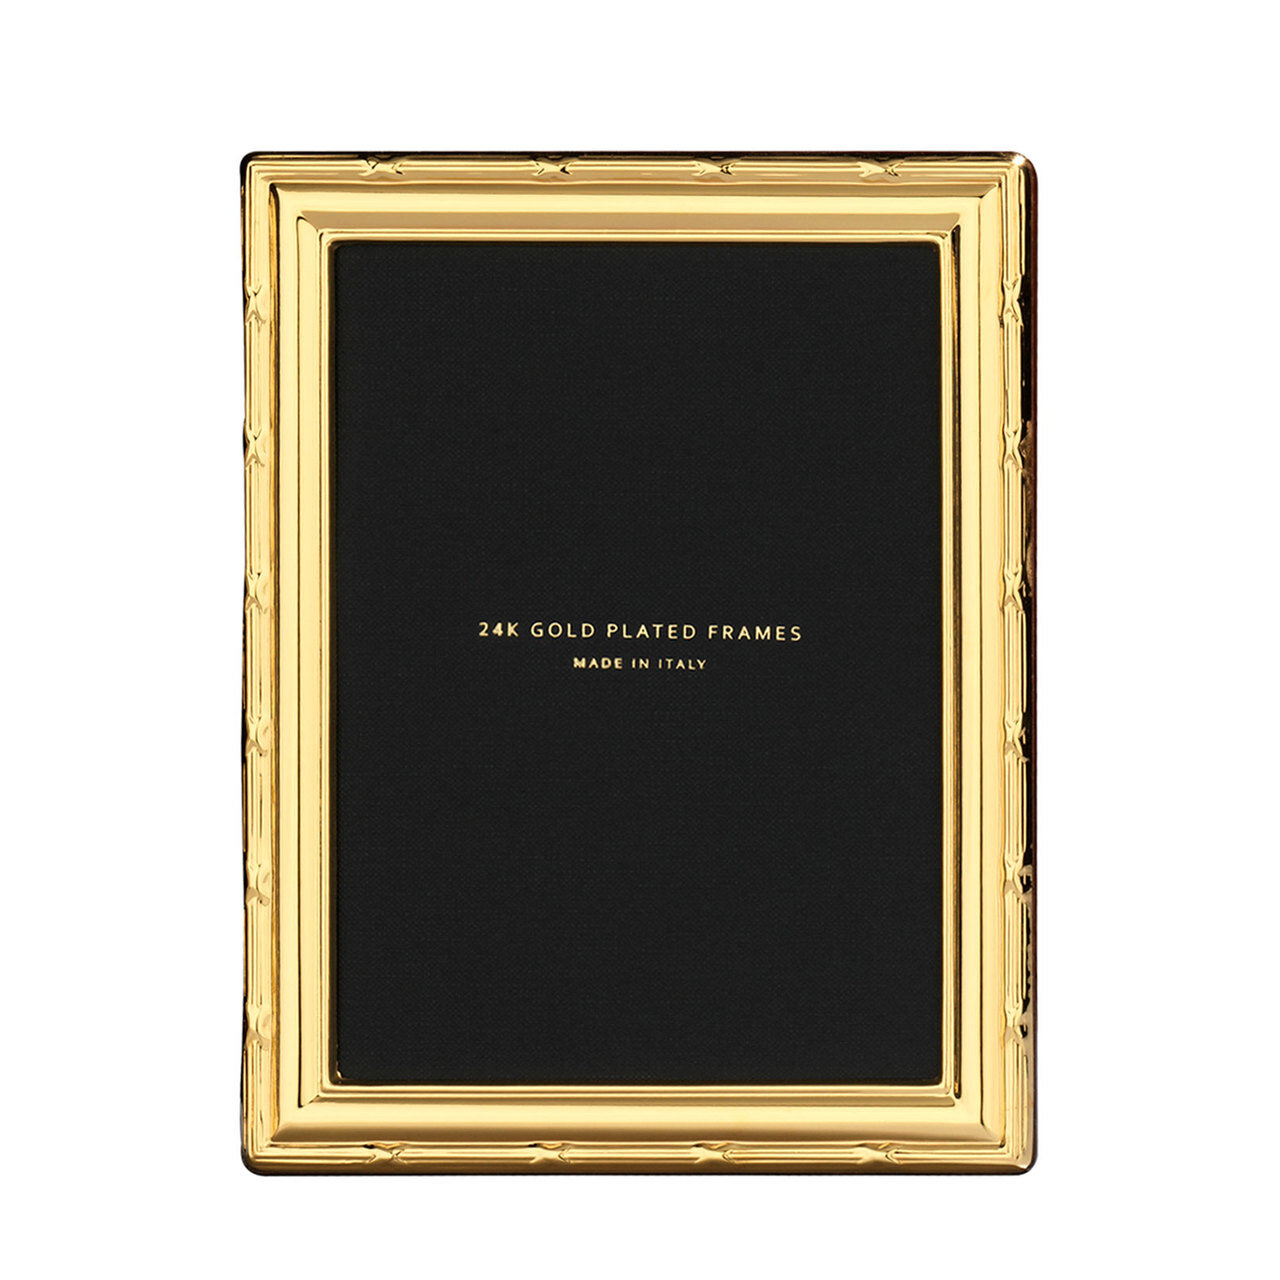 Cunill Ribbon 4 x 6 Inch Picture Frame - 24k Gold Plated 0.5 Microns